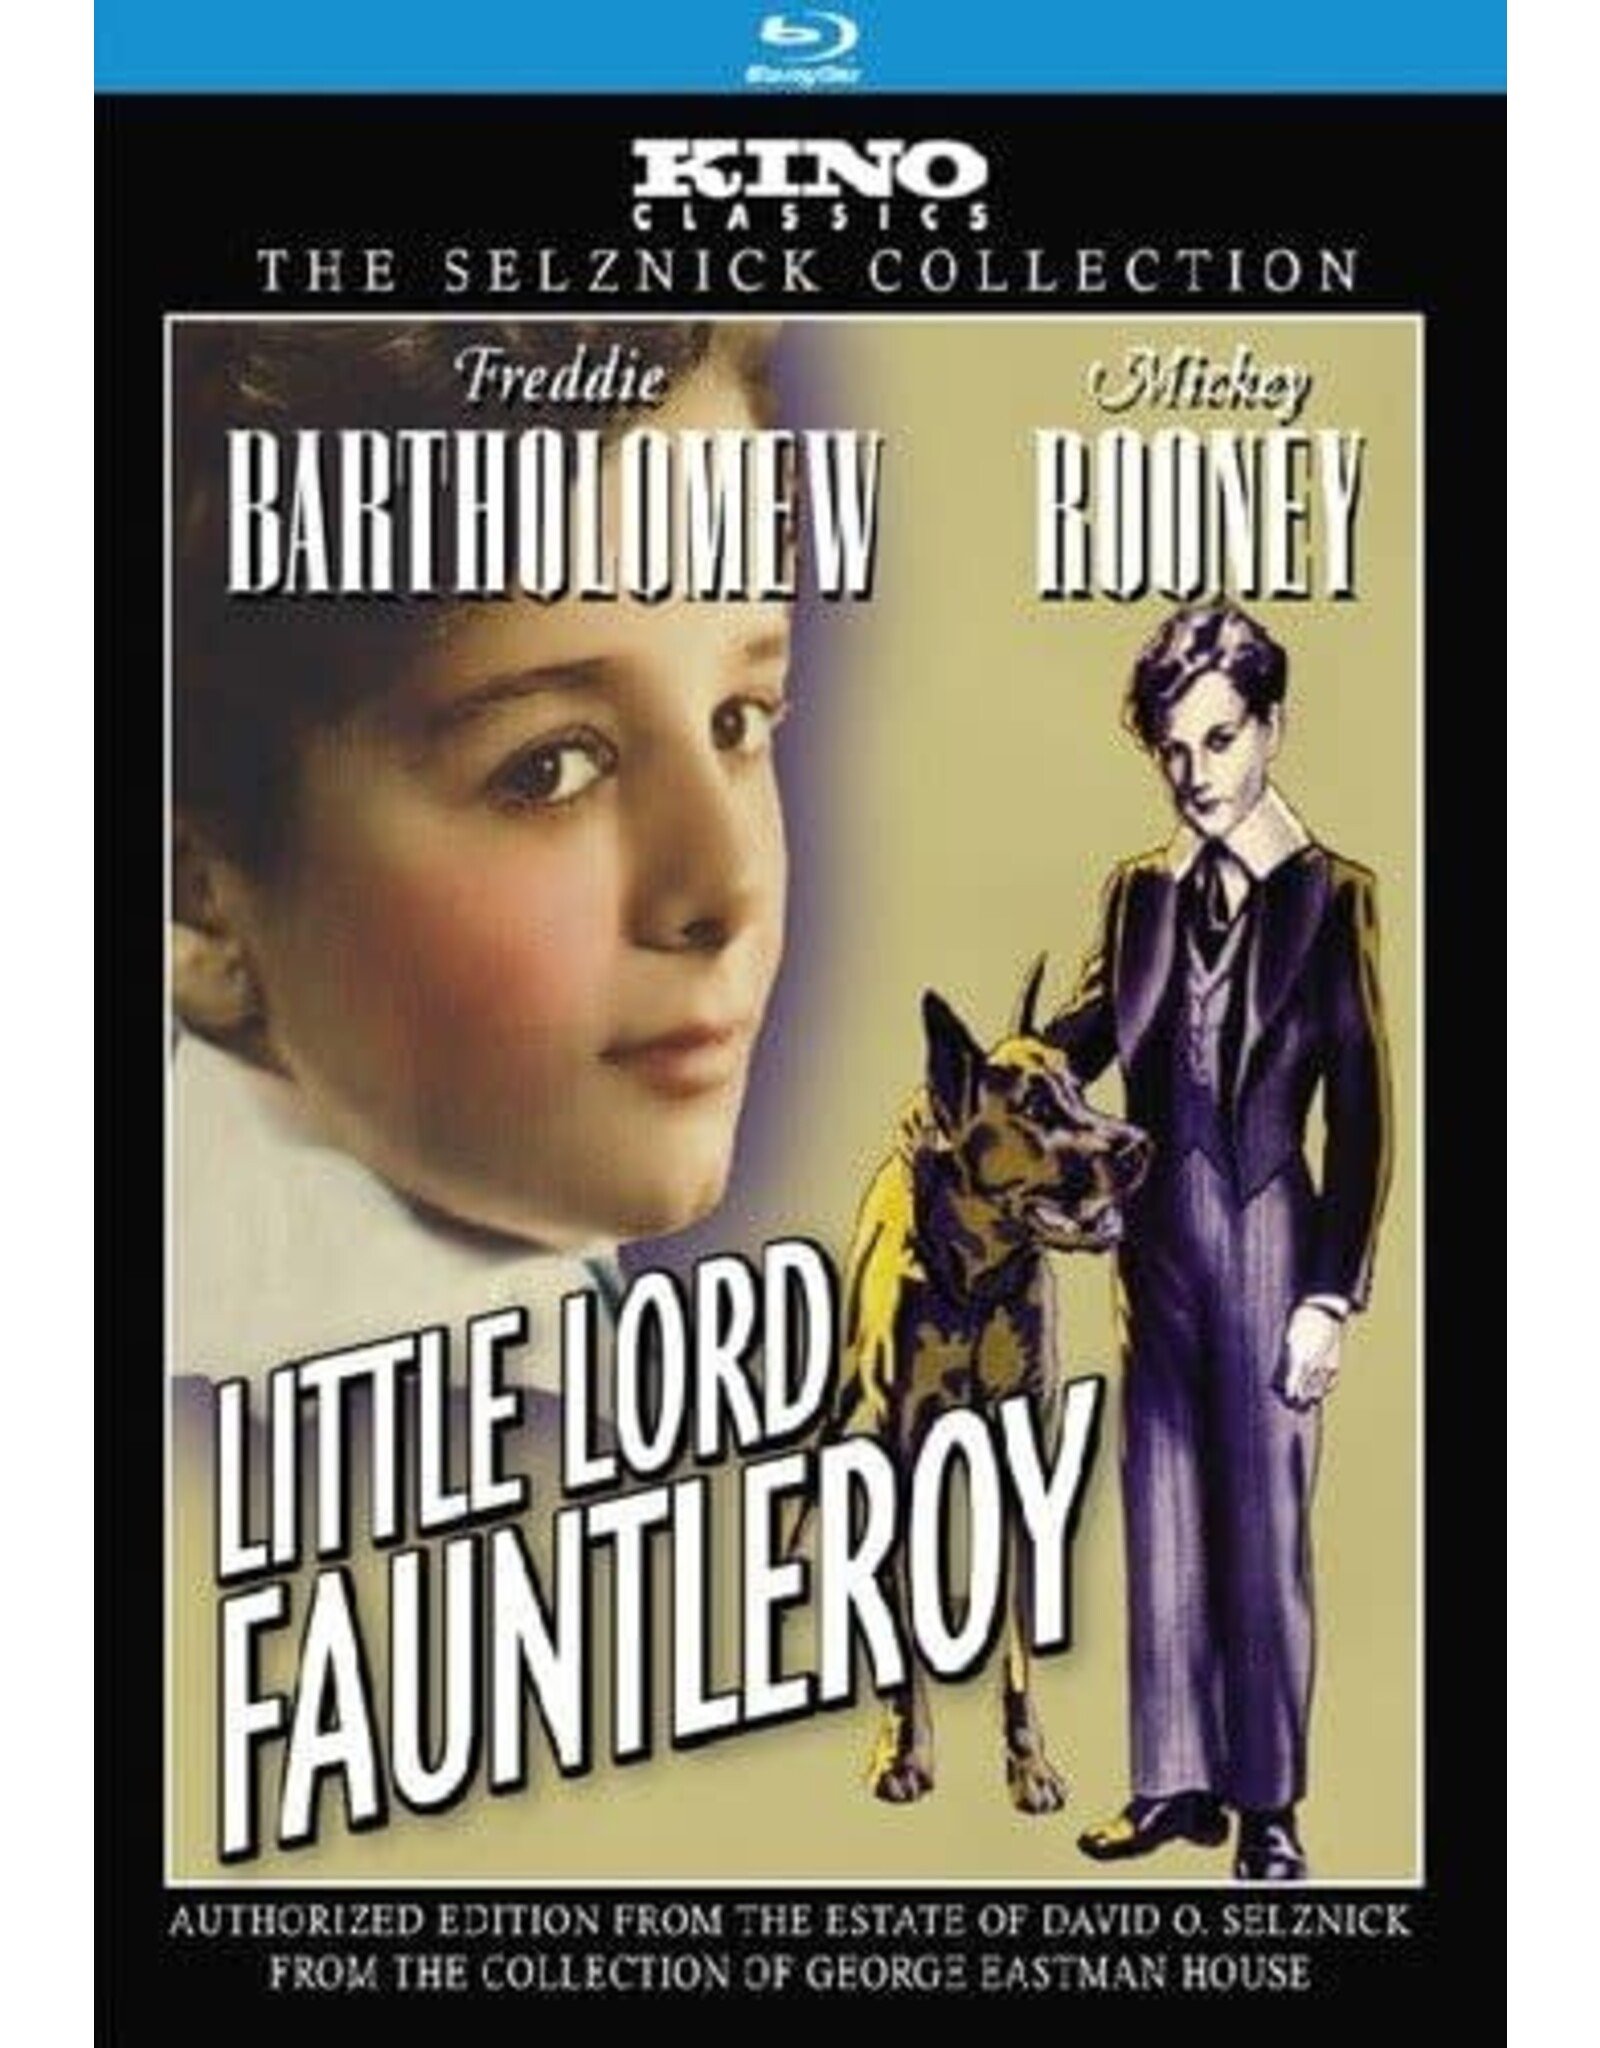 Cult & Cool Little Lord Fauntleroy - Kino Classics (Brand New)